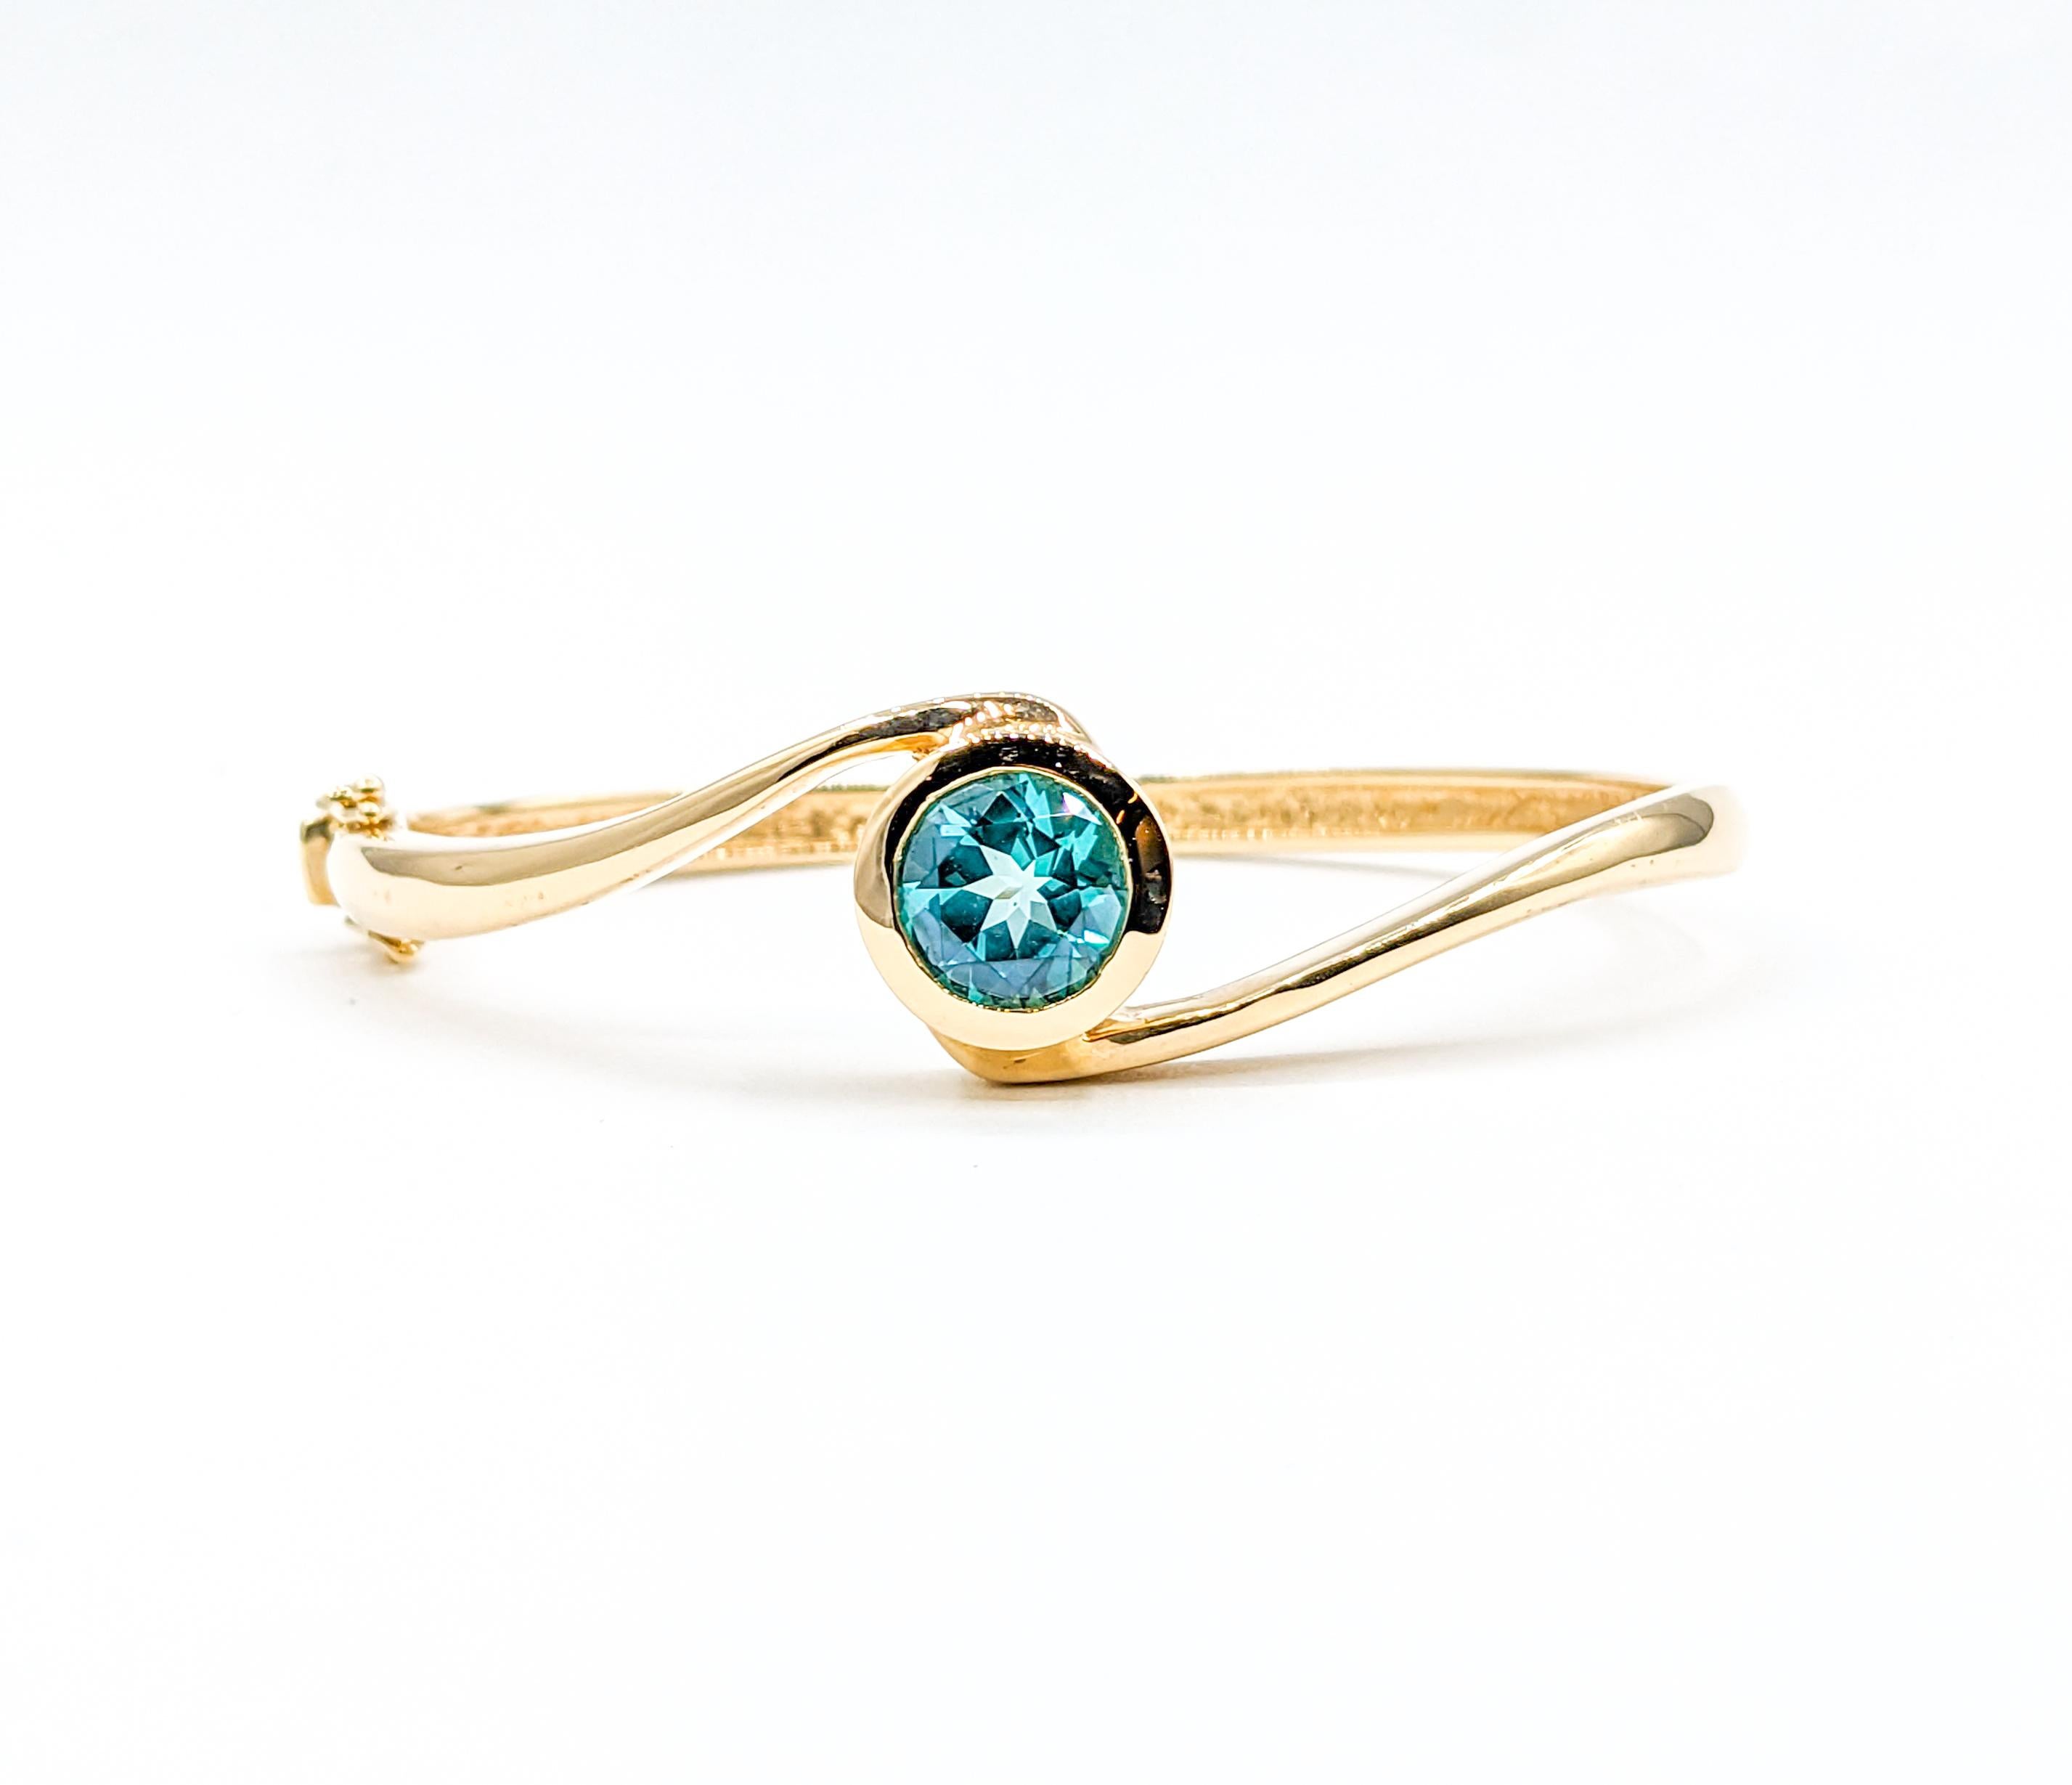 Modern Bezel Set Blue Topaz Hinge Bangle Bracelet in Yellow Gold

Introducing this exquisite bracelet bangle, a magnificent piece of jewelry skillfully crafted in 14k yellow gold and adorned with a captivating 9mm round blue topaz. The topaz's